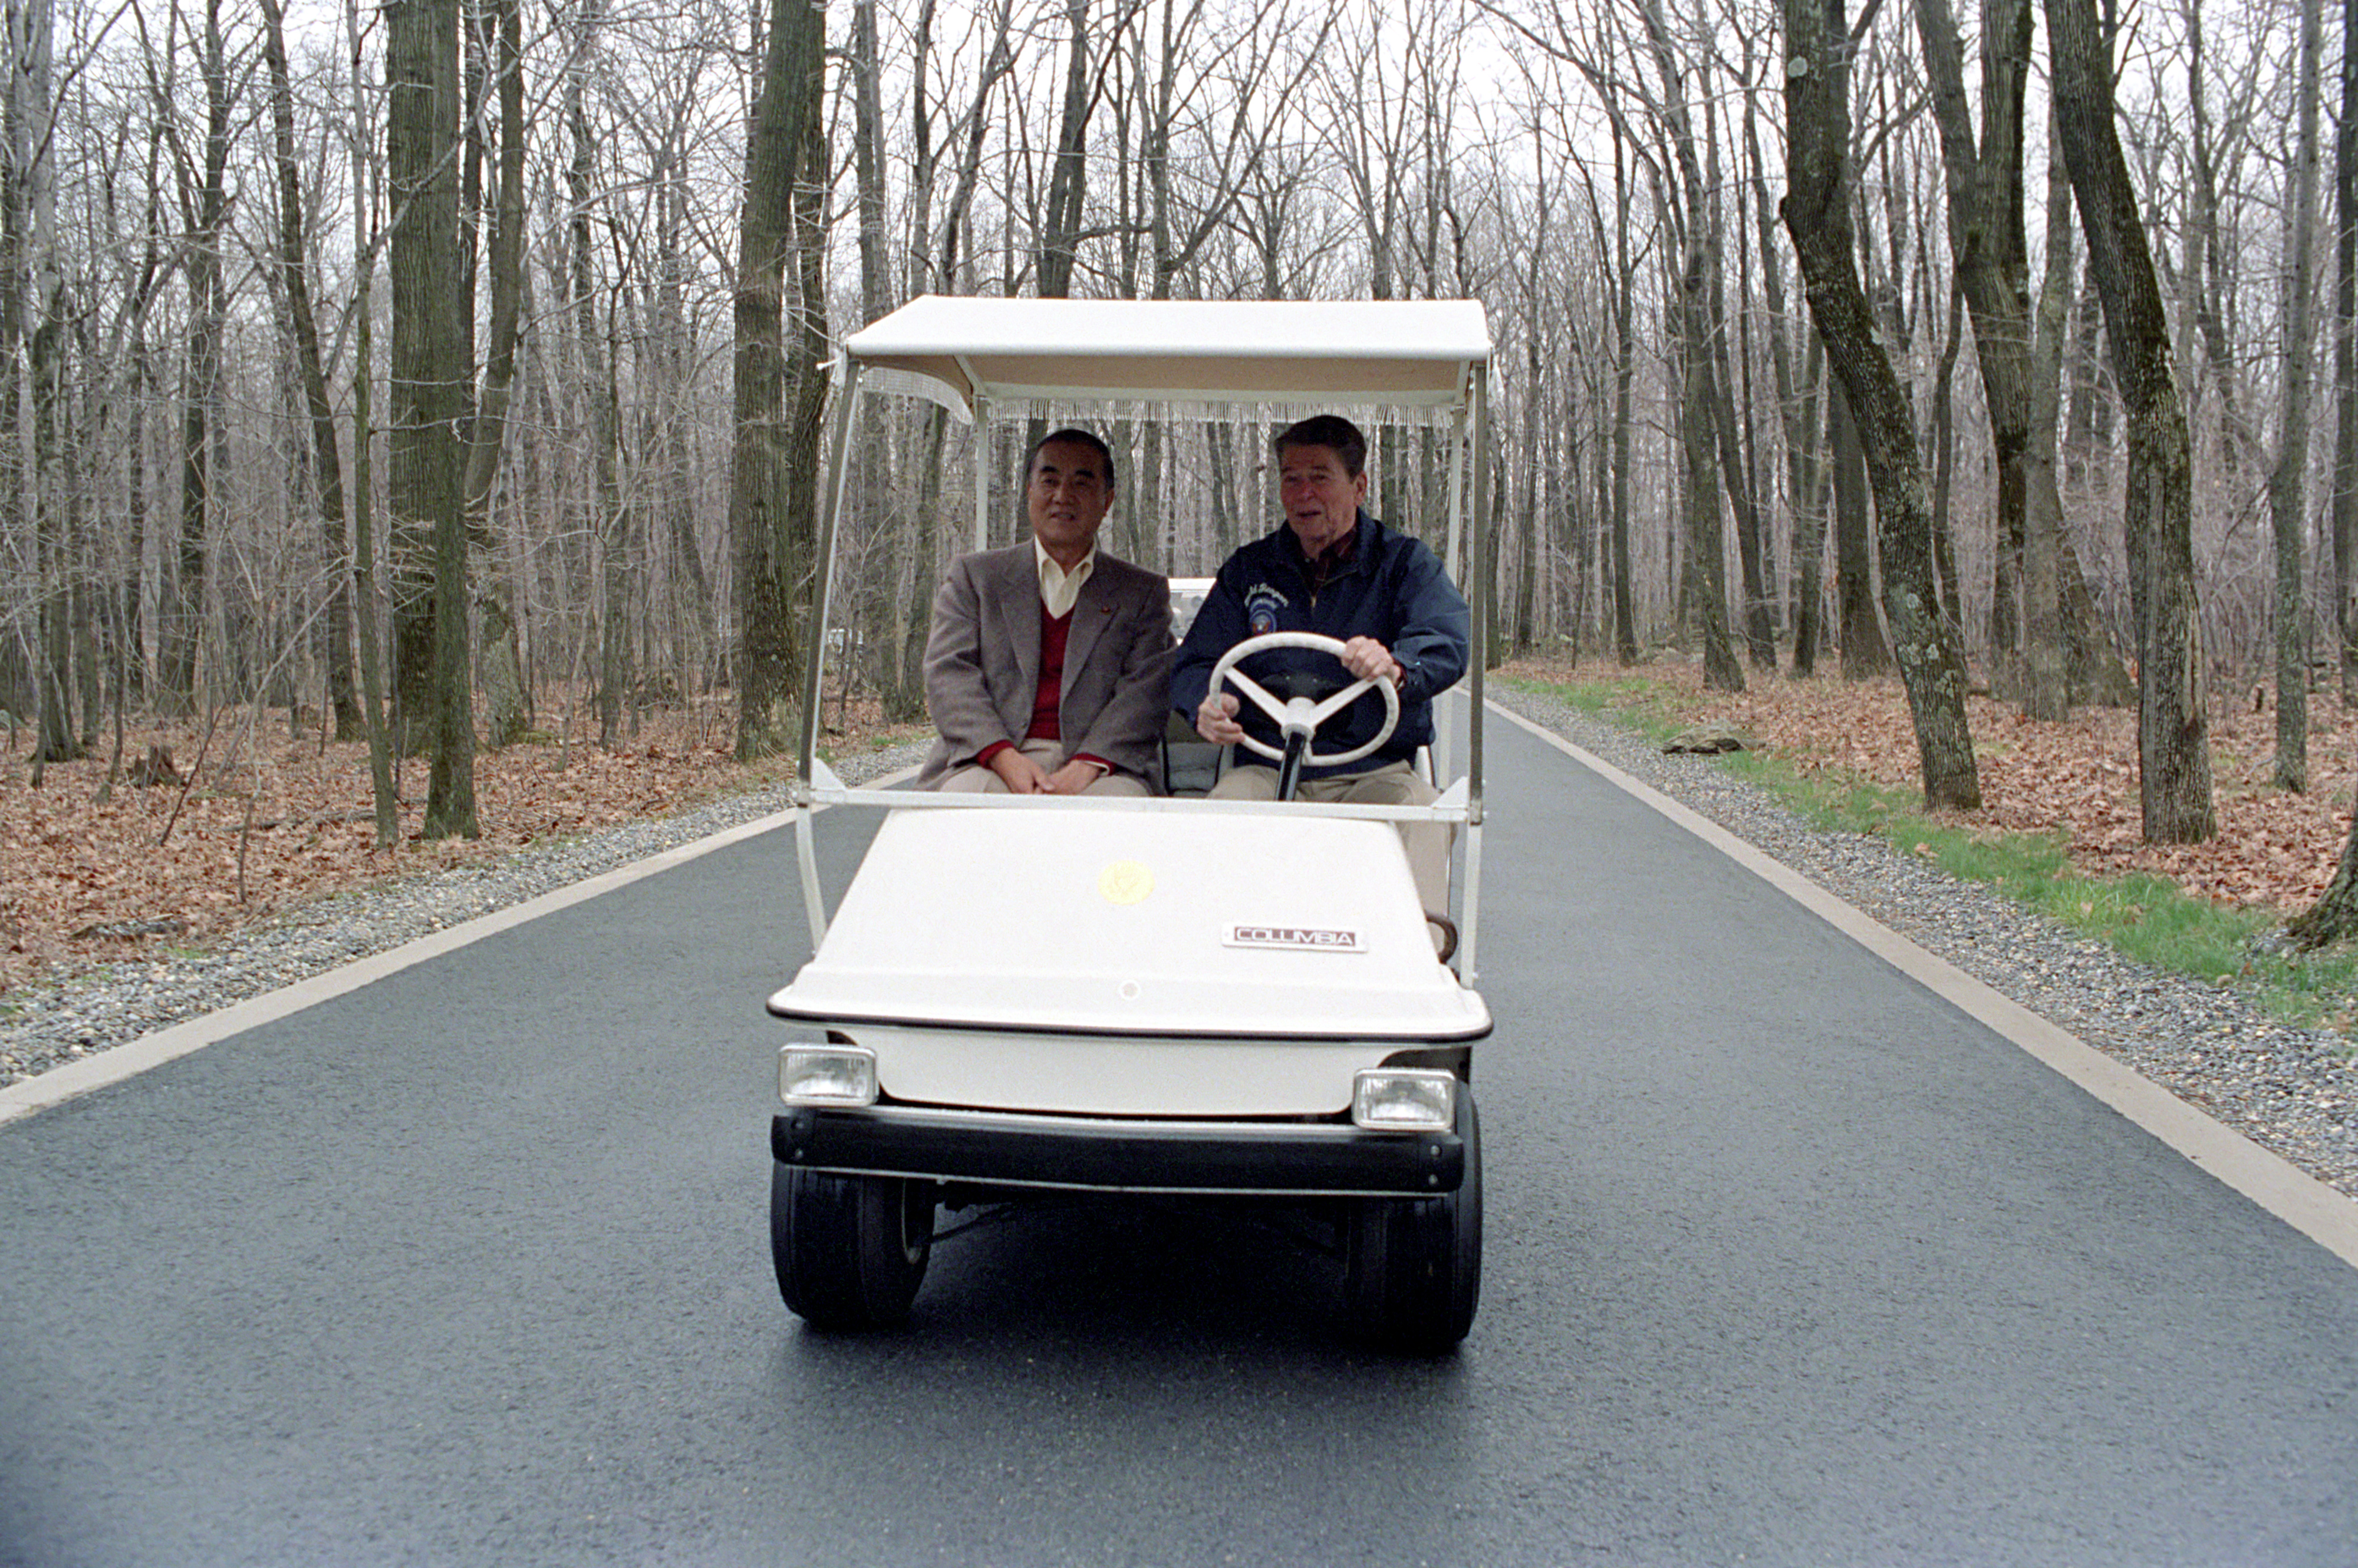 Photograph of Ronald Reagan and Nakasone Yasuhiro in a golf cart. Reagan is driving. It is April, and there are no leaves on any trees in the foggy woods around them.